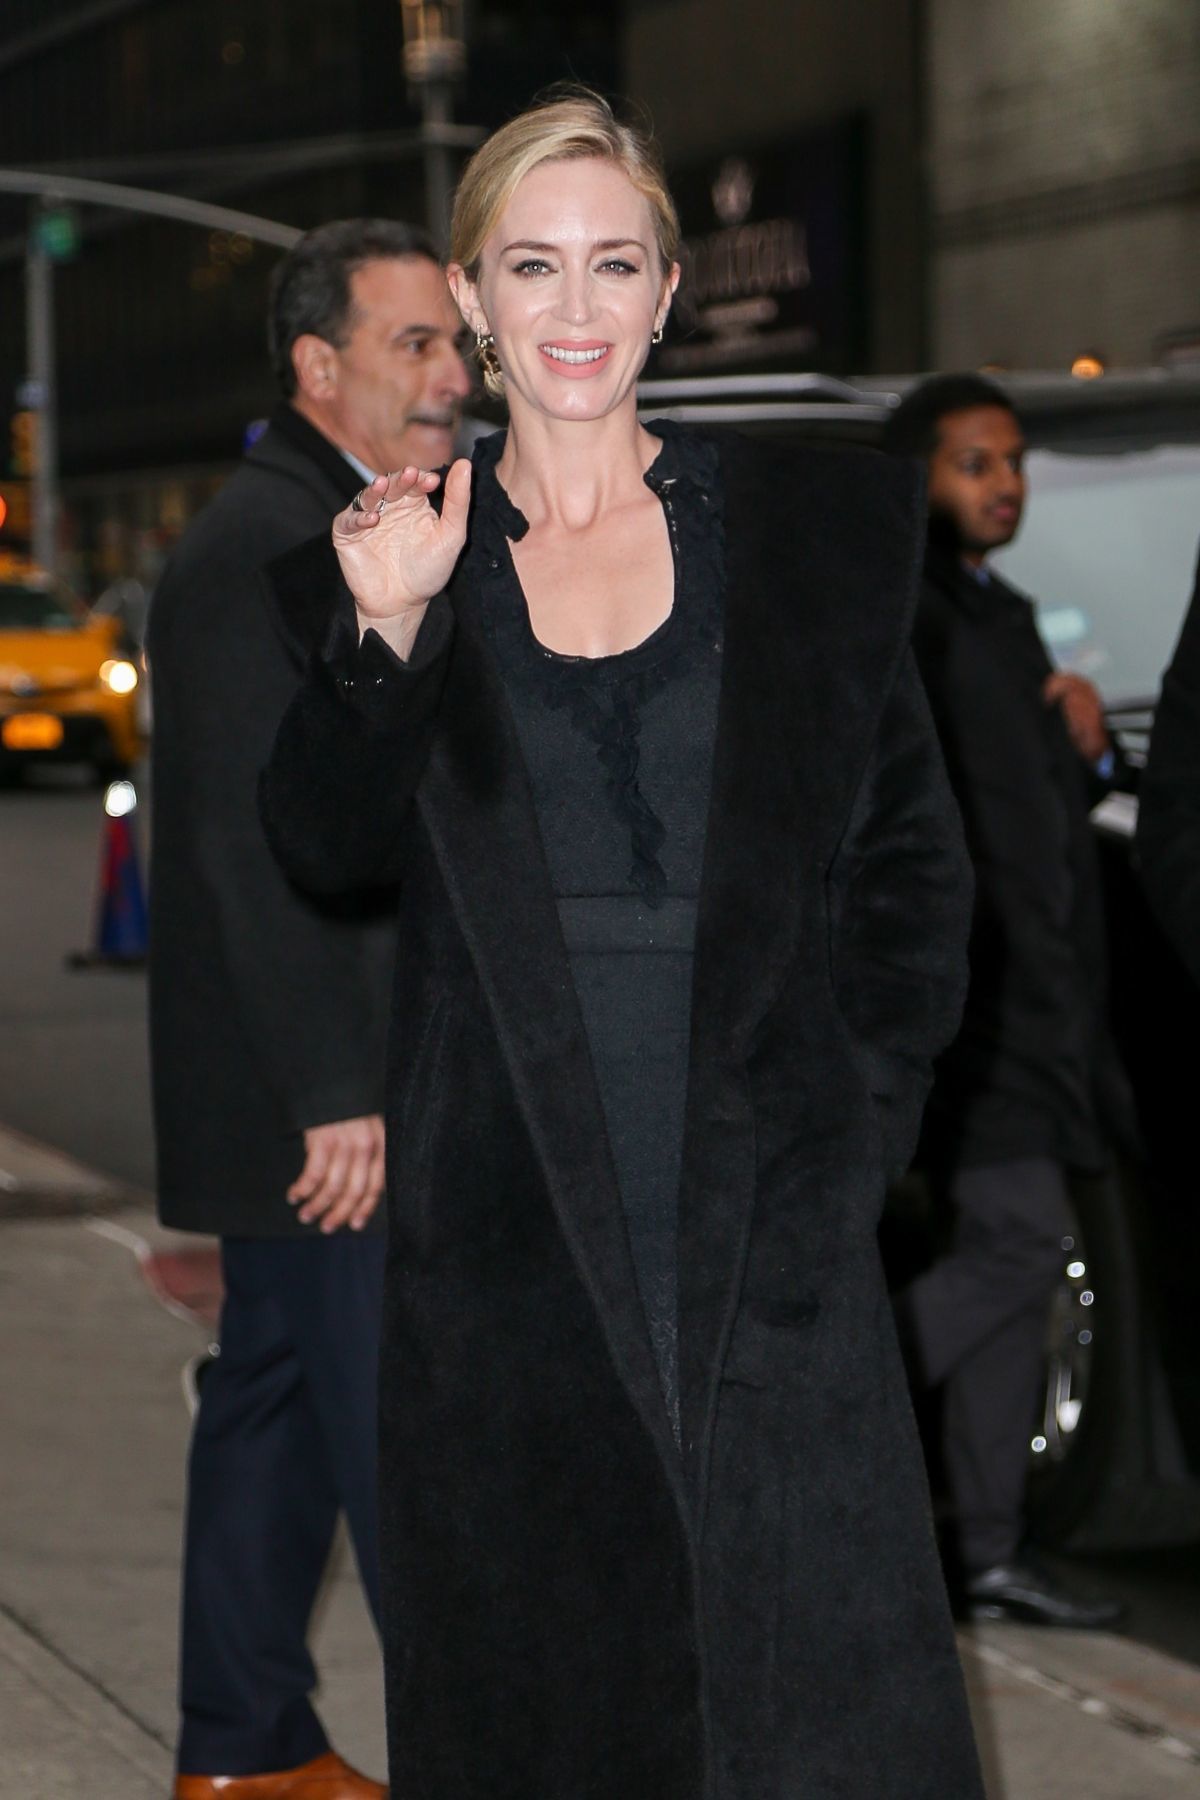 emily-blunt-arriving-at-the-late-show-with-stephen-colbert-in-nyc-32918-11.jpeg